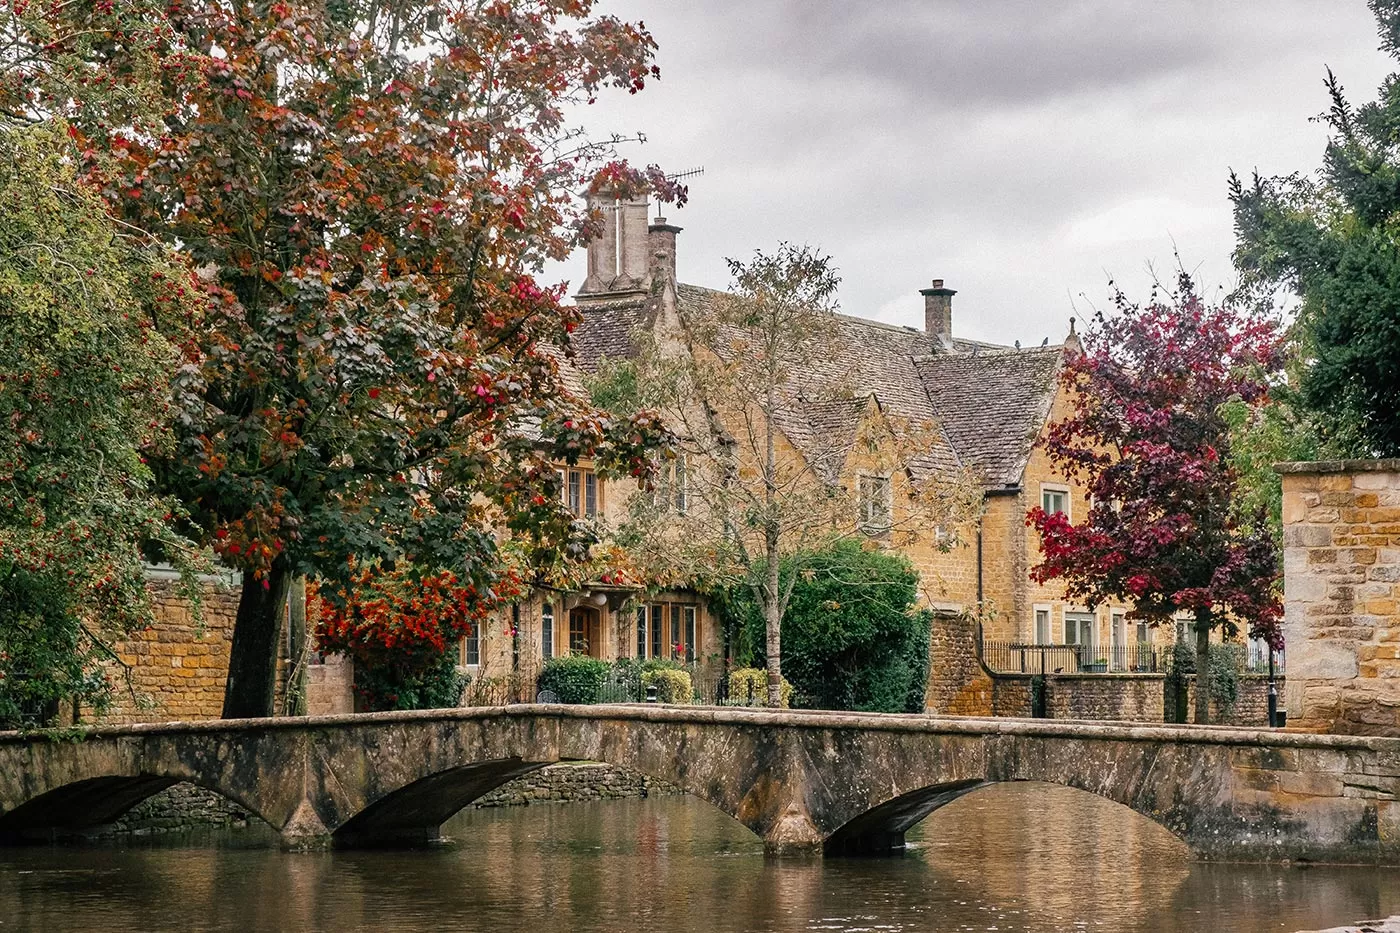 Cotswolds Best Villages - Bourton-on-the-Water - River and stone bridge